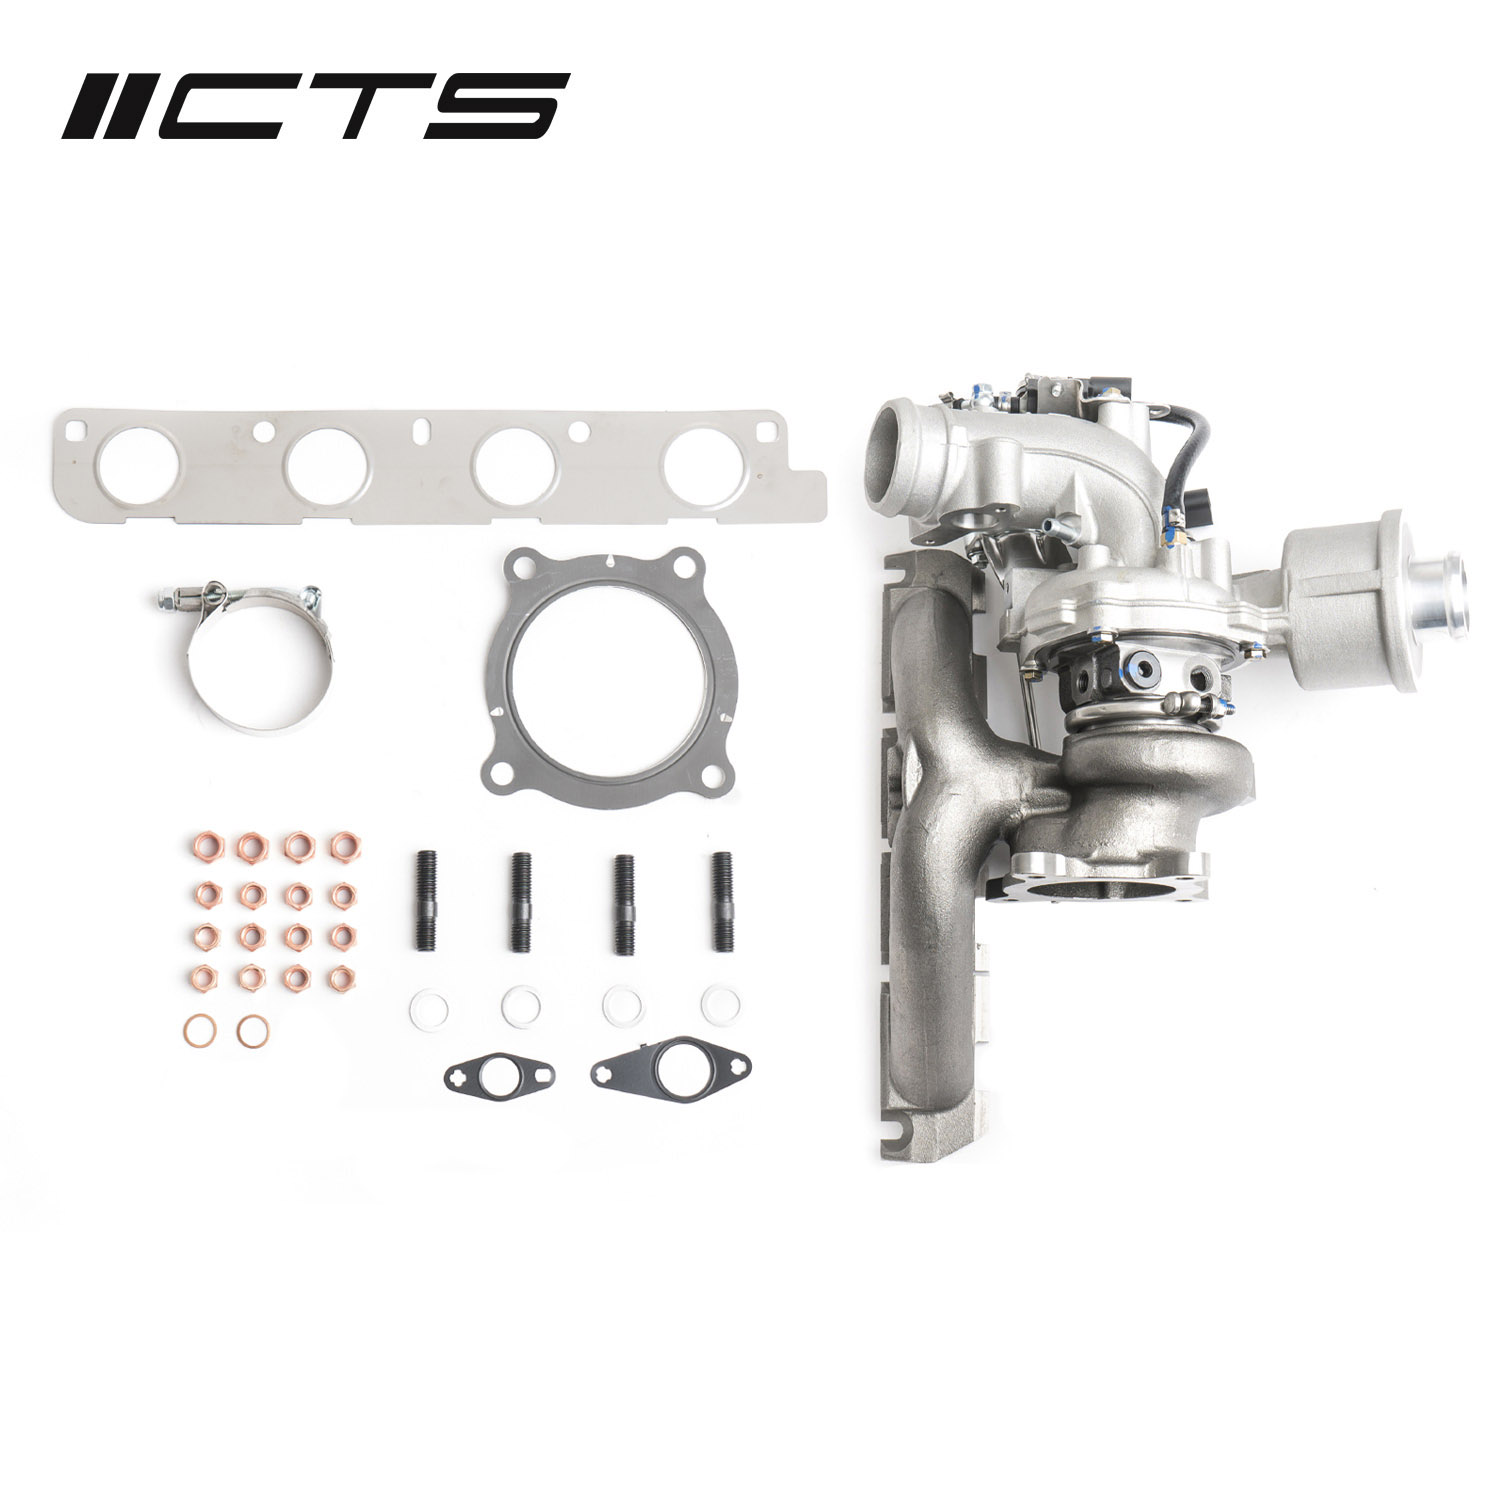 CTS Turbo K04 Turbocharger Upgrade for B7/B8 Audi A4, A5 ...